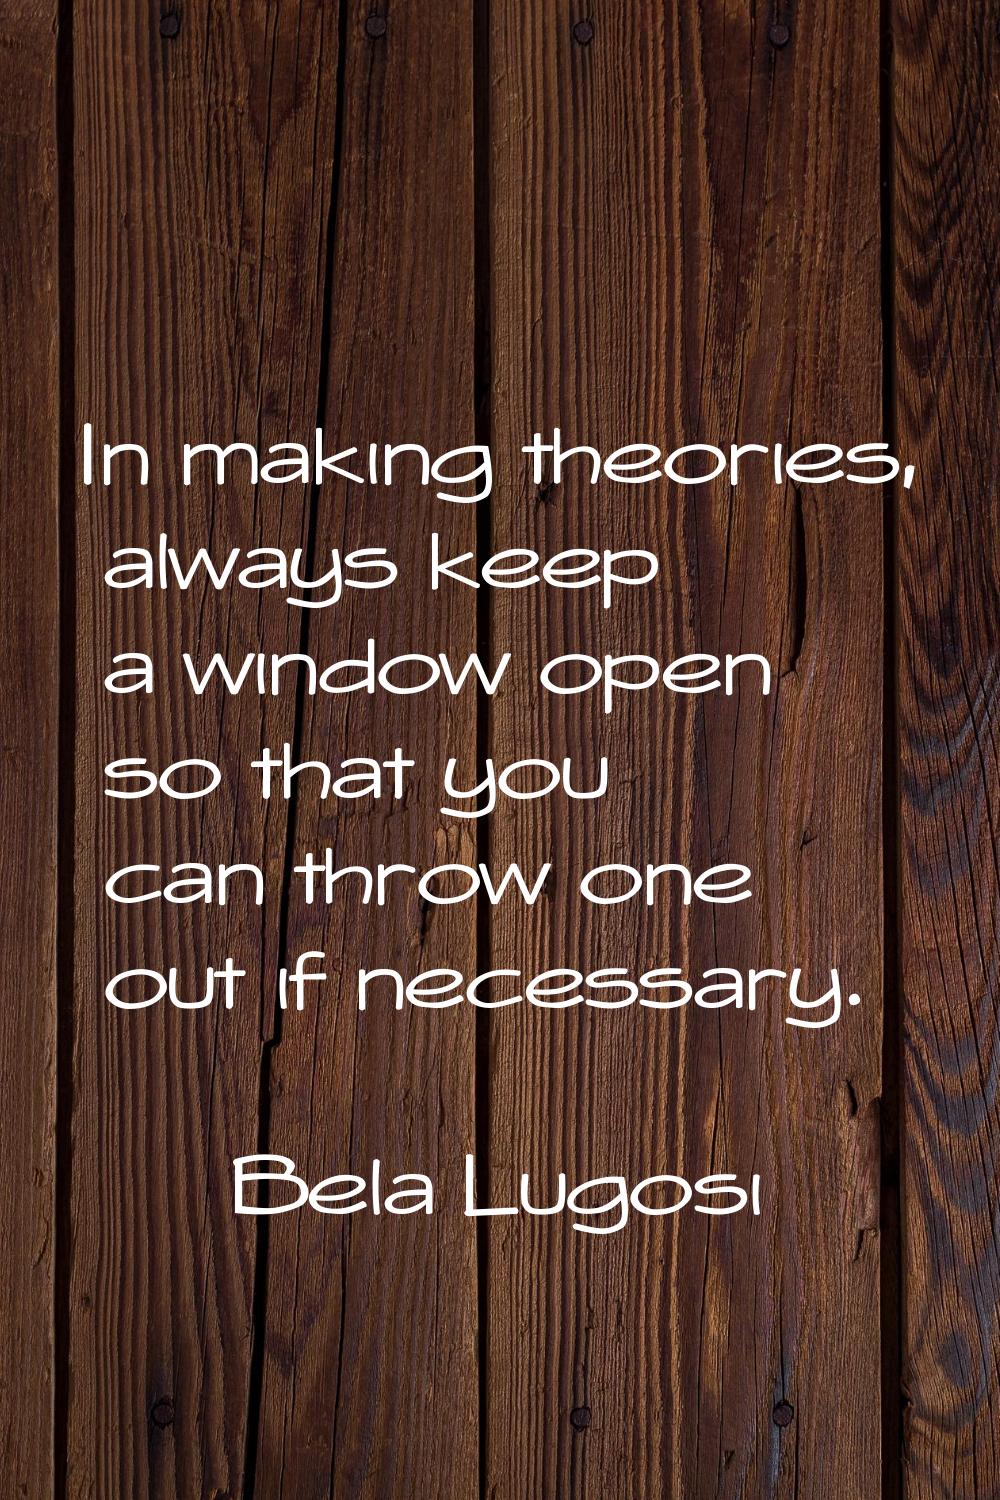 In making theories, always keep a window open so that you can throw one out if necessary.